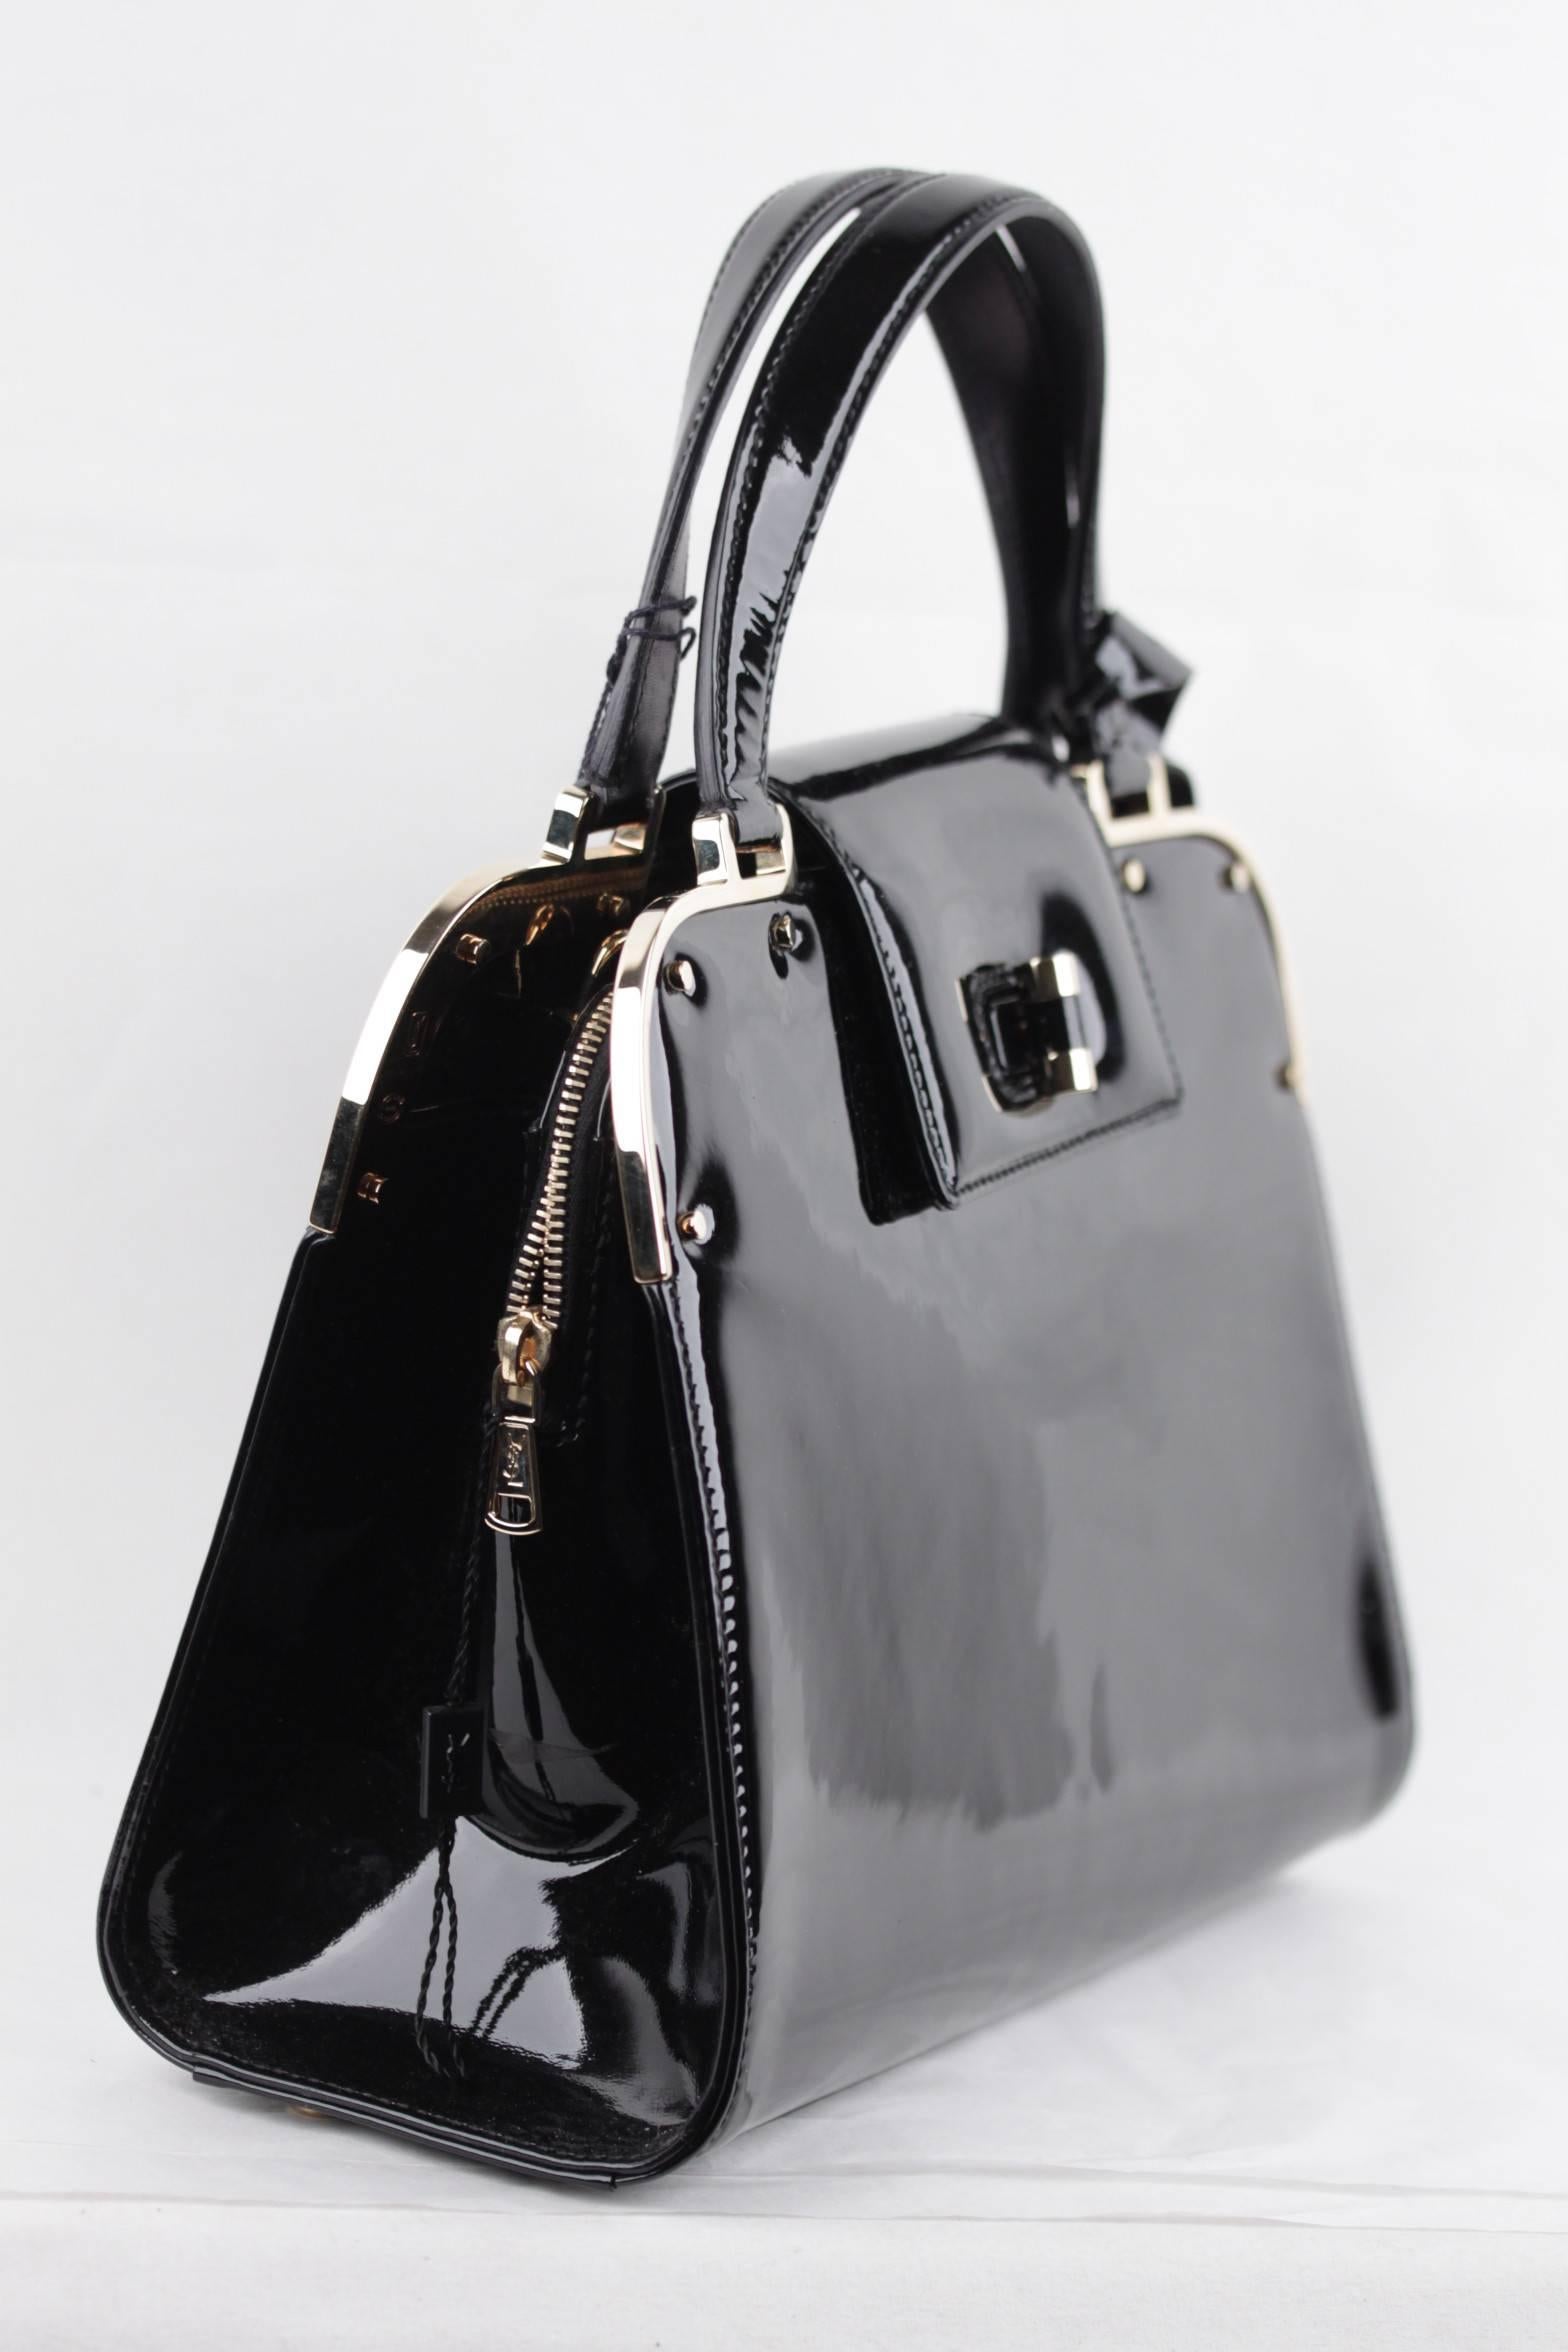 
- Yves Saint Laurent Black Patent Leather 'Uptown' Bag
- Features ultra-gloss black patent leather and gold metal hardware
- Double flat leather handles
- YSL's signature turn lock closure
- Black satin lining
- 2 Two open compartments & 1